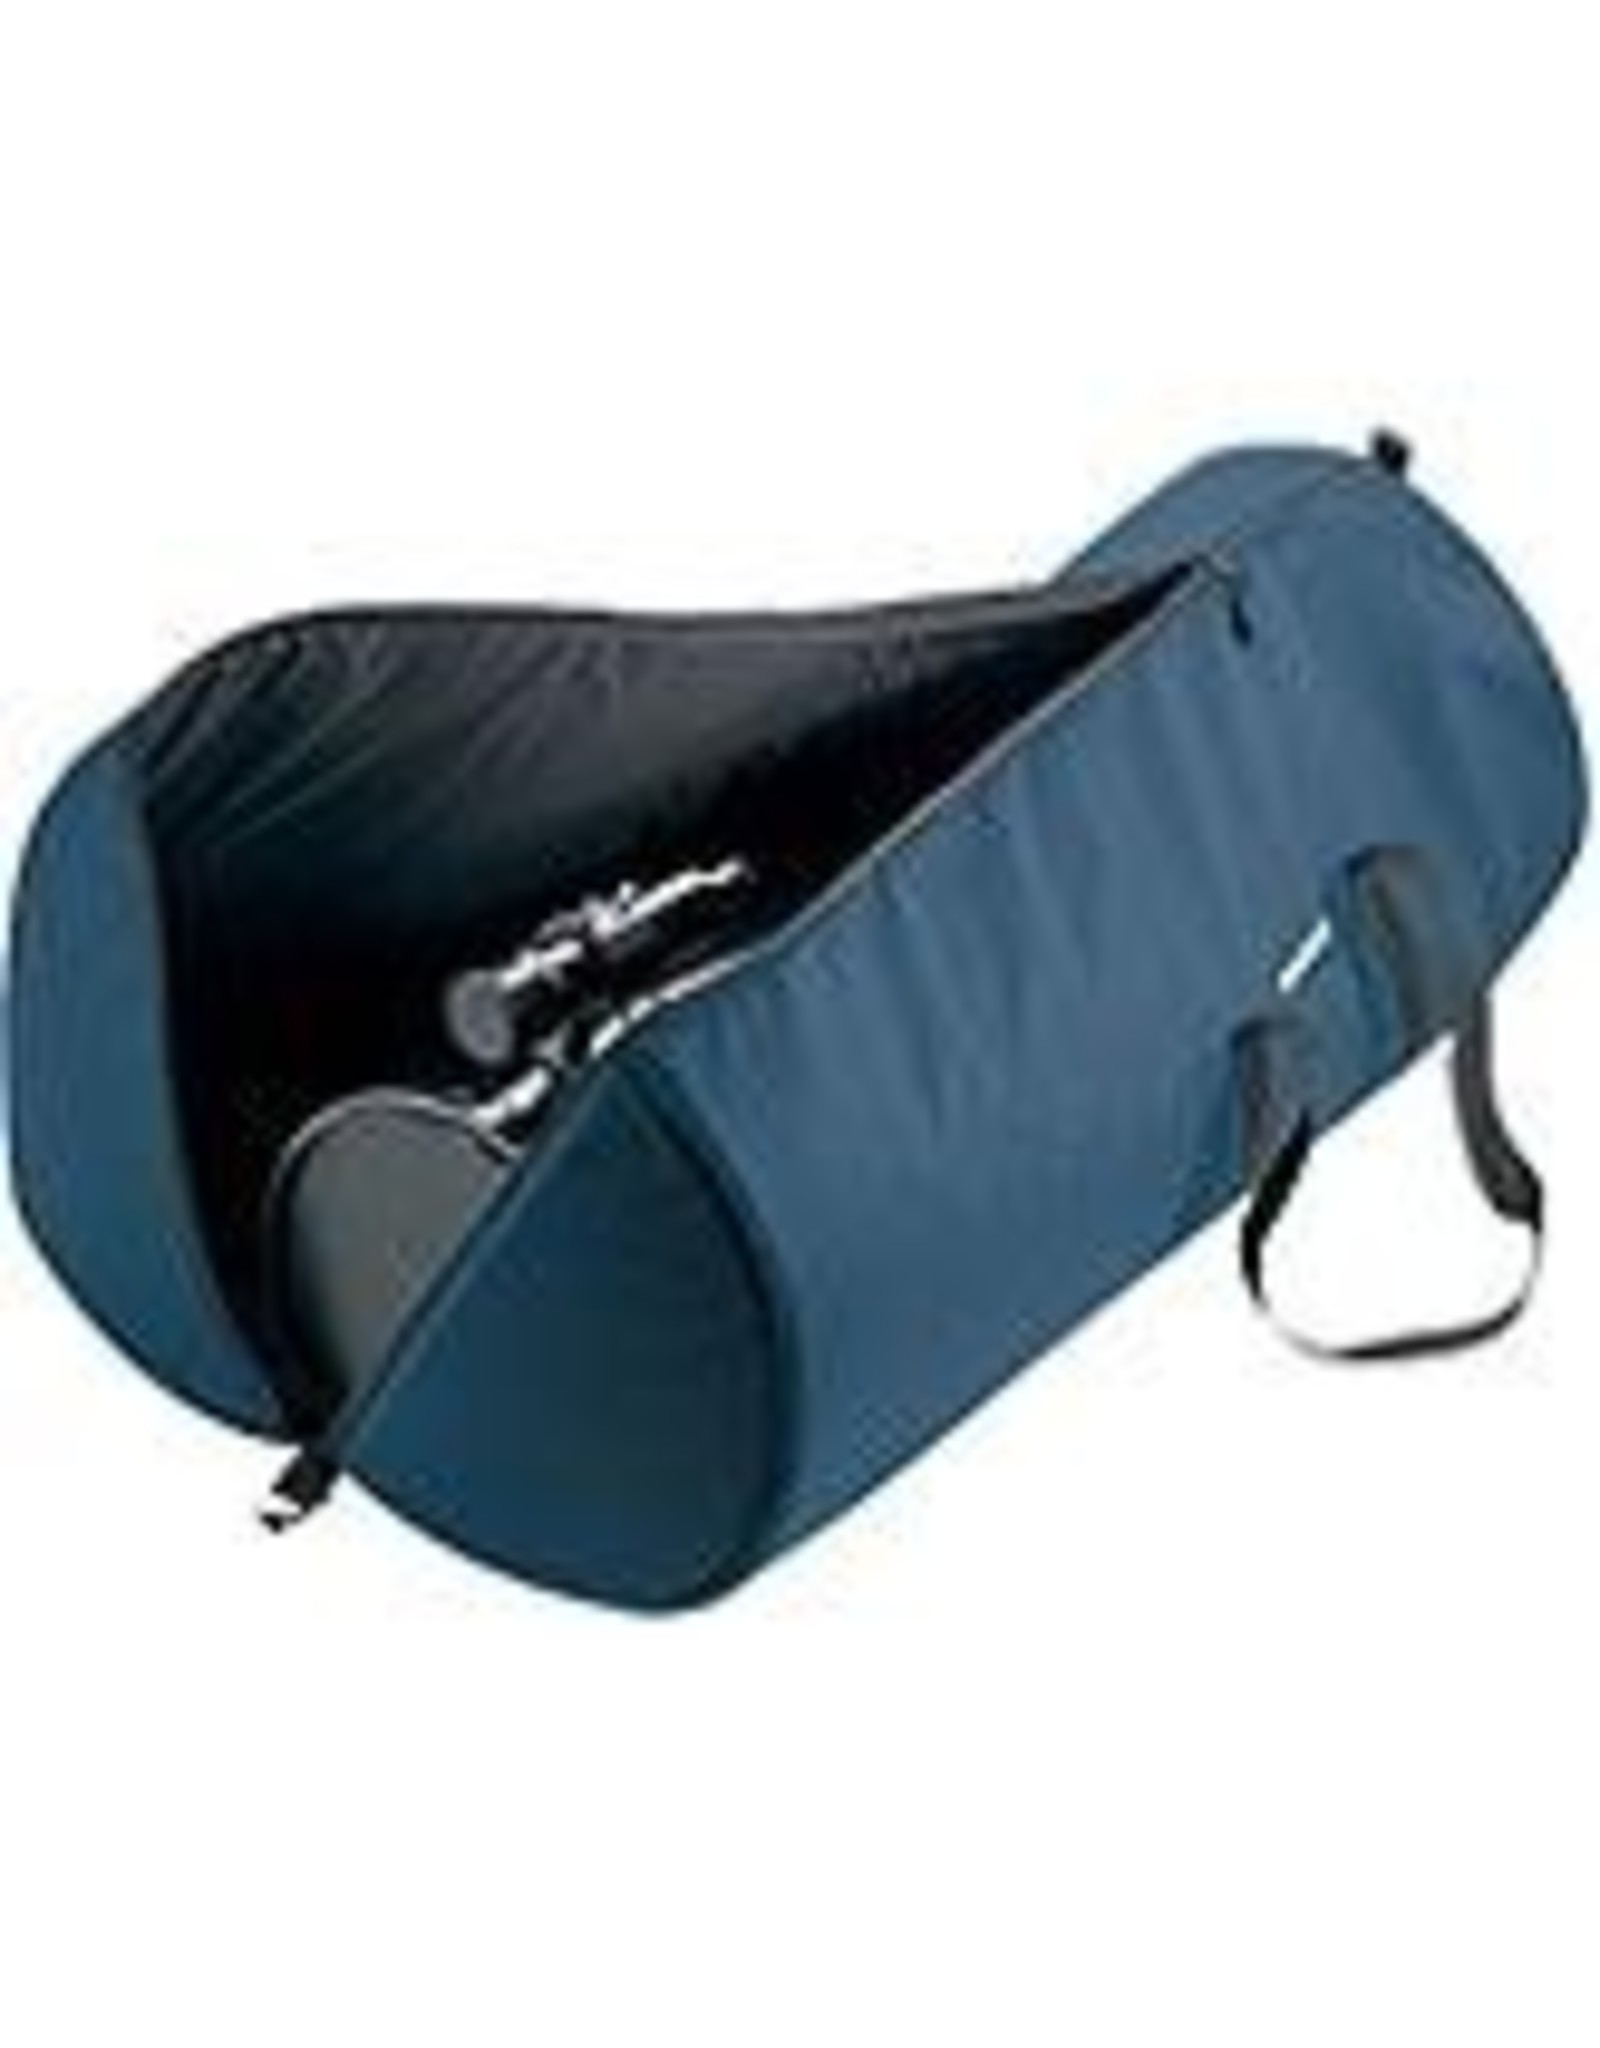 Orion Orion #15160 Padded Telescope Case 44"x11.5"x13.5" FITS XT6, 150mm, & 203mm Scopes